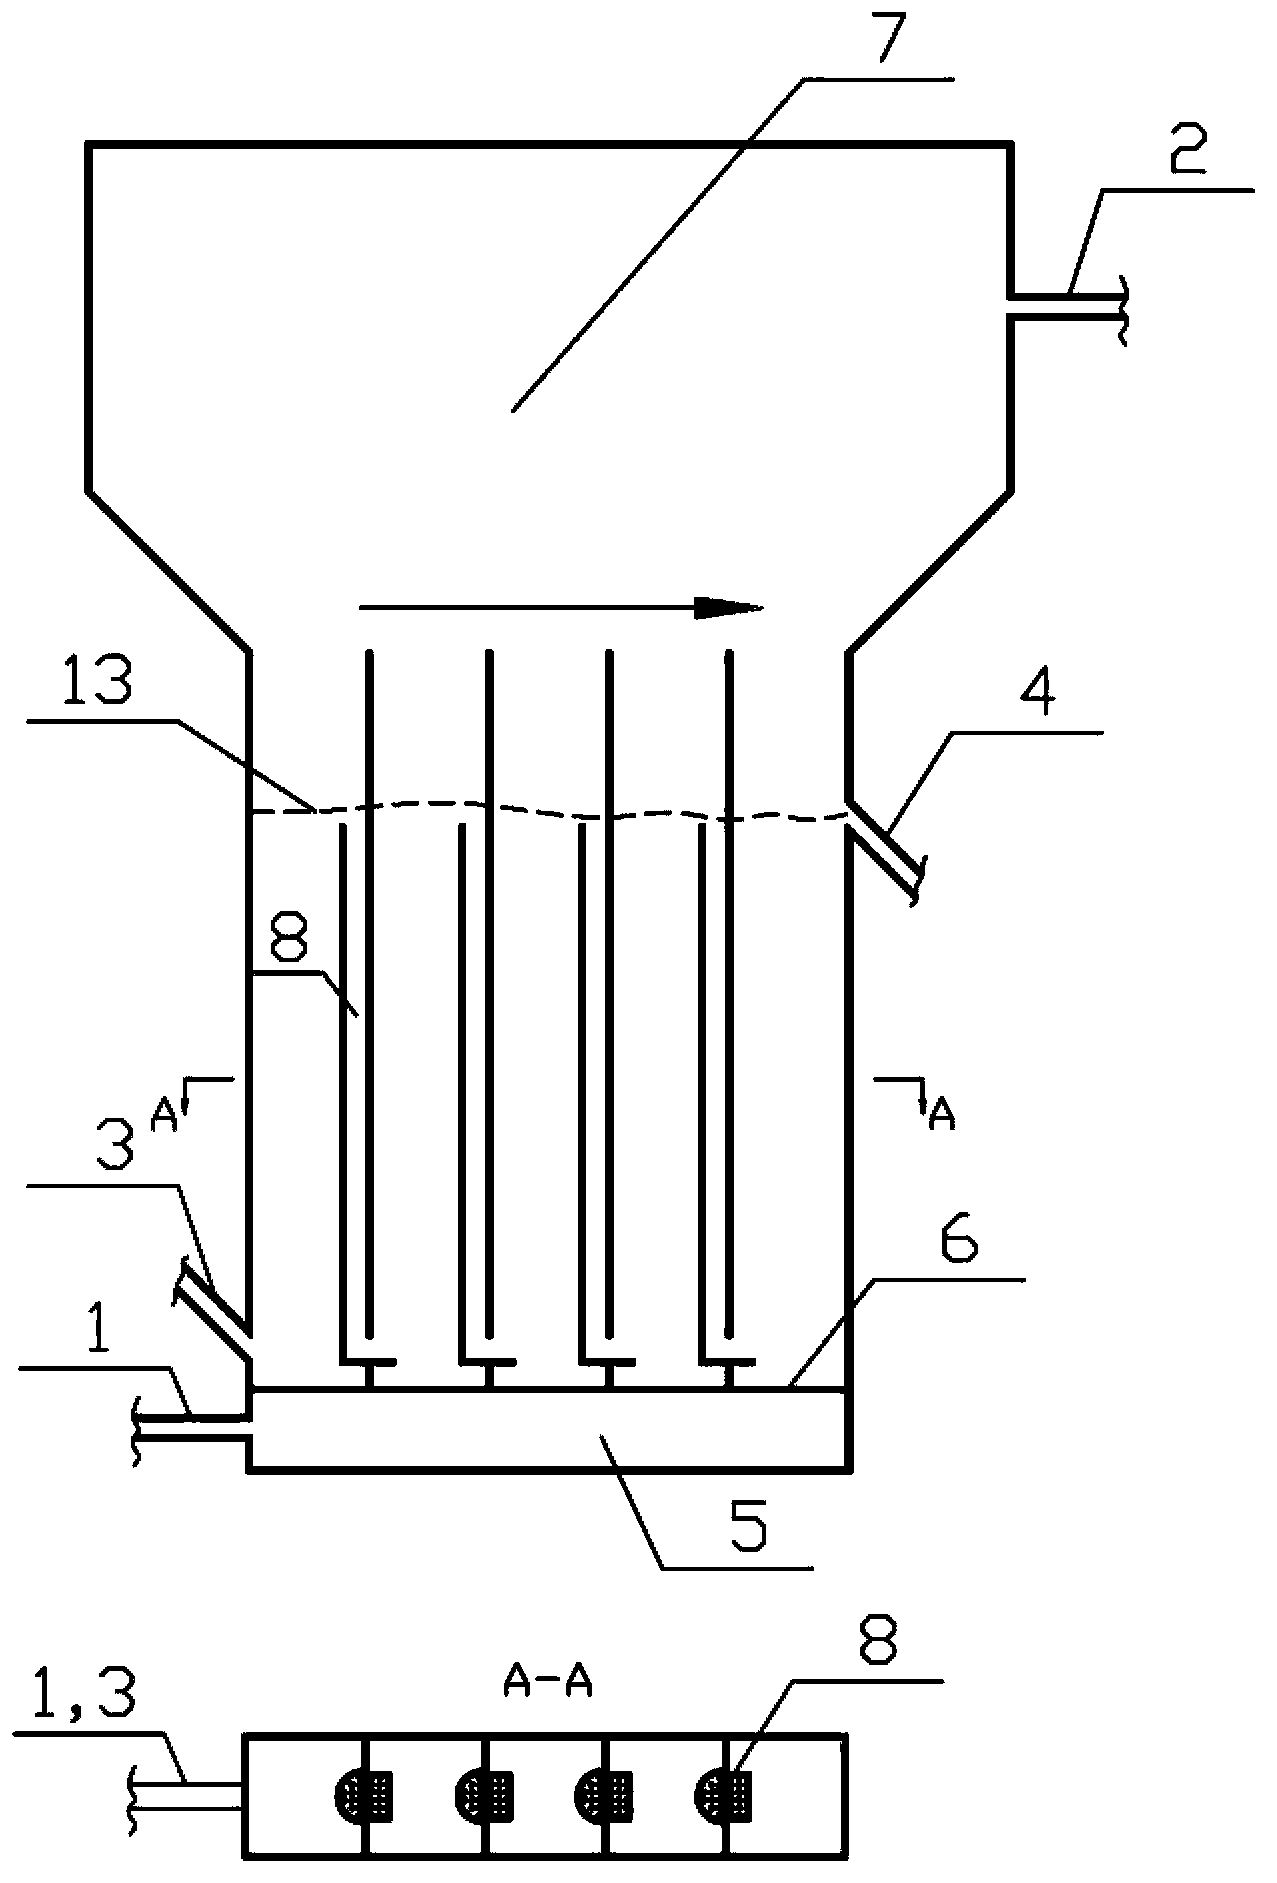 Multi-chamber fluidized bed reactor